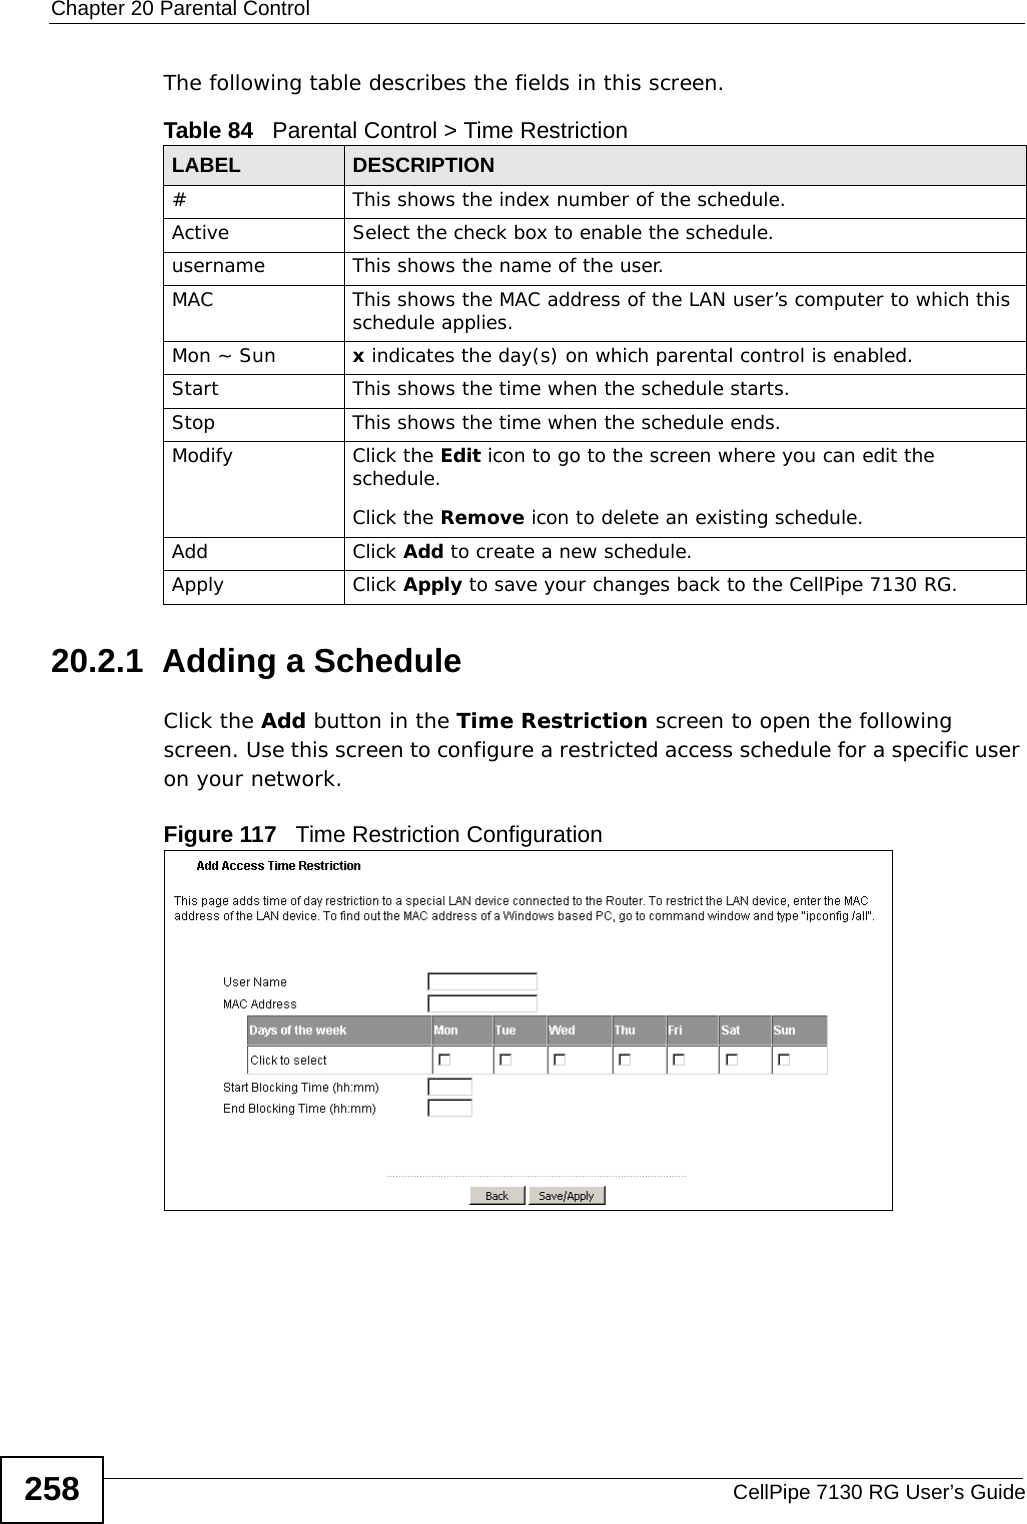 Chapter 20 Parental ControlCellPipe 7130 RG User’s Guide258The following table describes the fields in this screen. 20.2.1  Adding a ScheduleClick the Add button in the Time Restriction screen to open the following screen. Use this screen to configure a restricted access schedule for a specific user on your network. Figure 117   Time Restriction Configuration Table 84   Parental Control &gt; Time RestrictionLABEL DESCRIPTION#This shows the index number of the schedule.Active Select the check box to enable the schedule.username This shows the name of the user.MAC This shows the MAC address of the LAN user’s computer to which this schedule applies.Mon ~ Sun x indicates the day(s) on which parental control is enabled.Start This shows the time when the schedule starts.Stop This shows the time when the schedule ends.Modify Click the Edit icon to go to the screen where you can edit the schedule.Click the Remove icon to delete an existing schedule.Add Click Add to create a new schedule.Apply Click Apply to save your changes back to the CellPipe 7130 RG.